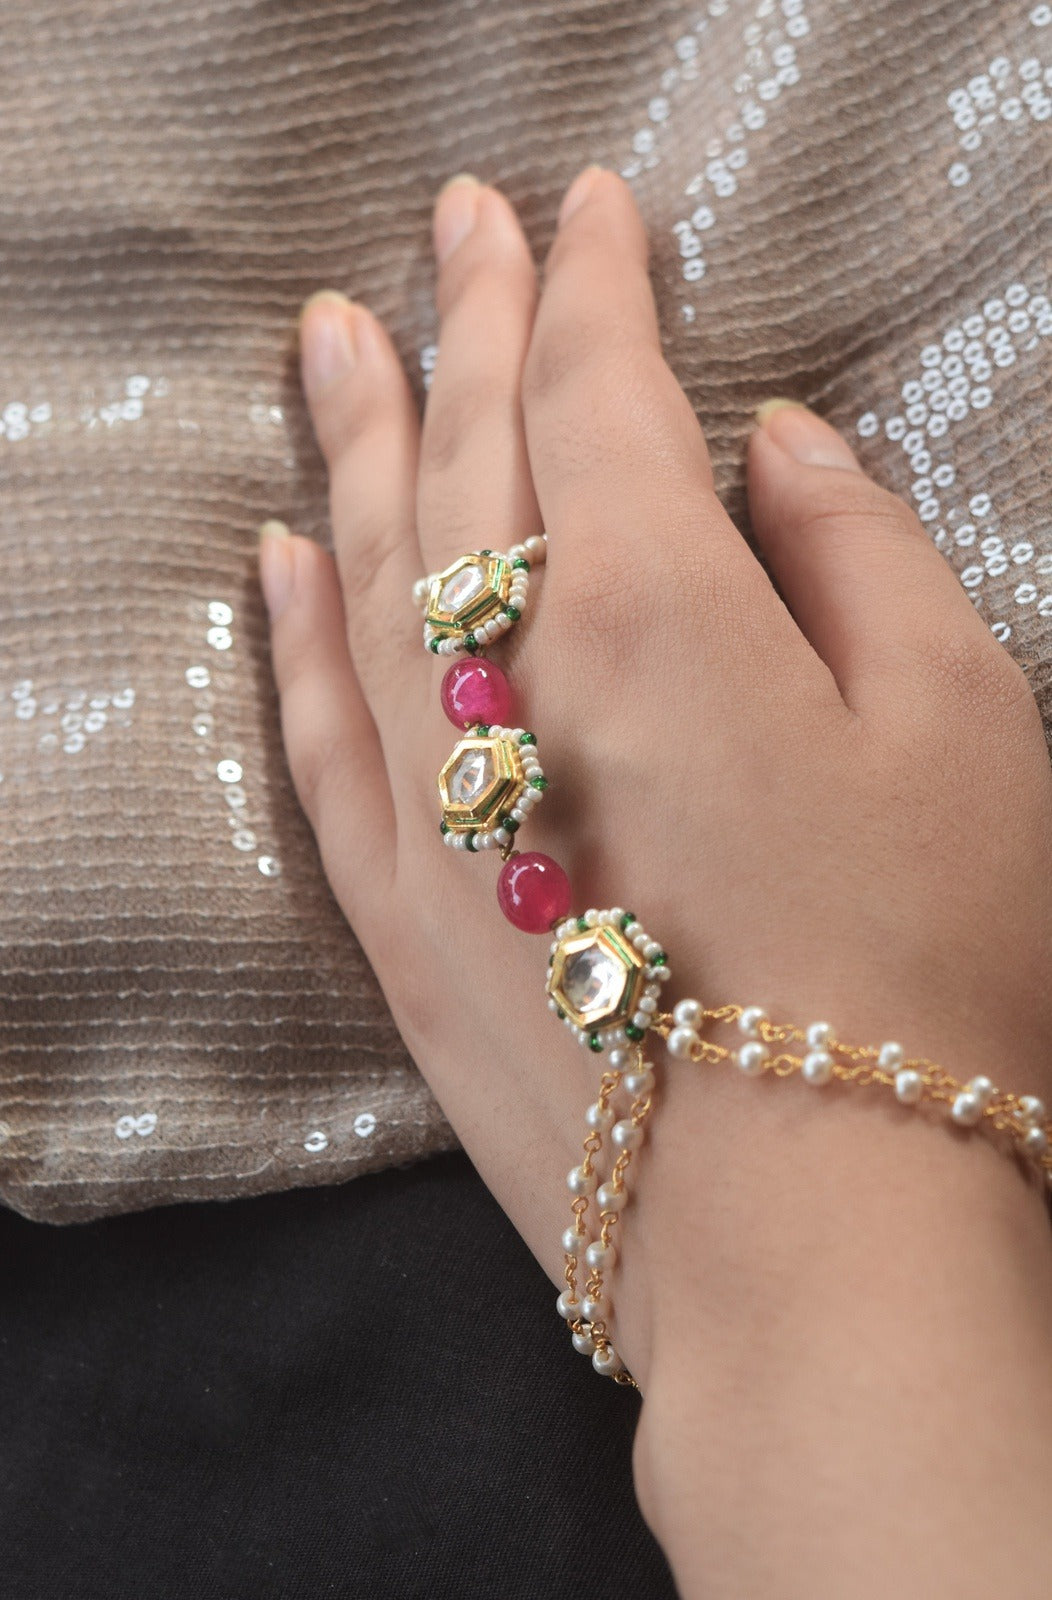 White Bracelets Falak Hand Harness at Kamakhyaa by House Of Heer. This item is Add Ons, Alloy Metal, Bracelets, Festive Jewellery, Festive Wear, Free Size, Gemstone, jewelry, July Sale, July Sale 2023, Less than $50, Natural, Pearl, Polkis, Products less than $25, Ring Bracelets, Textured